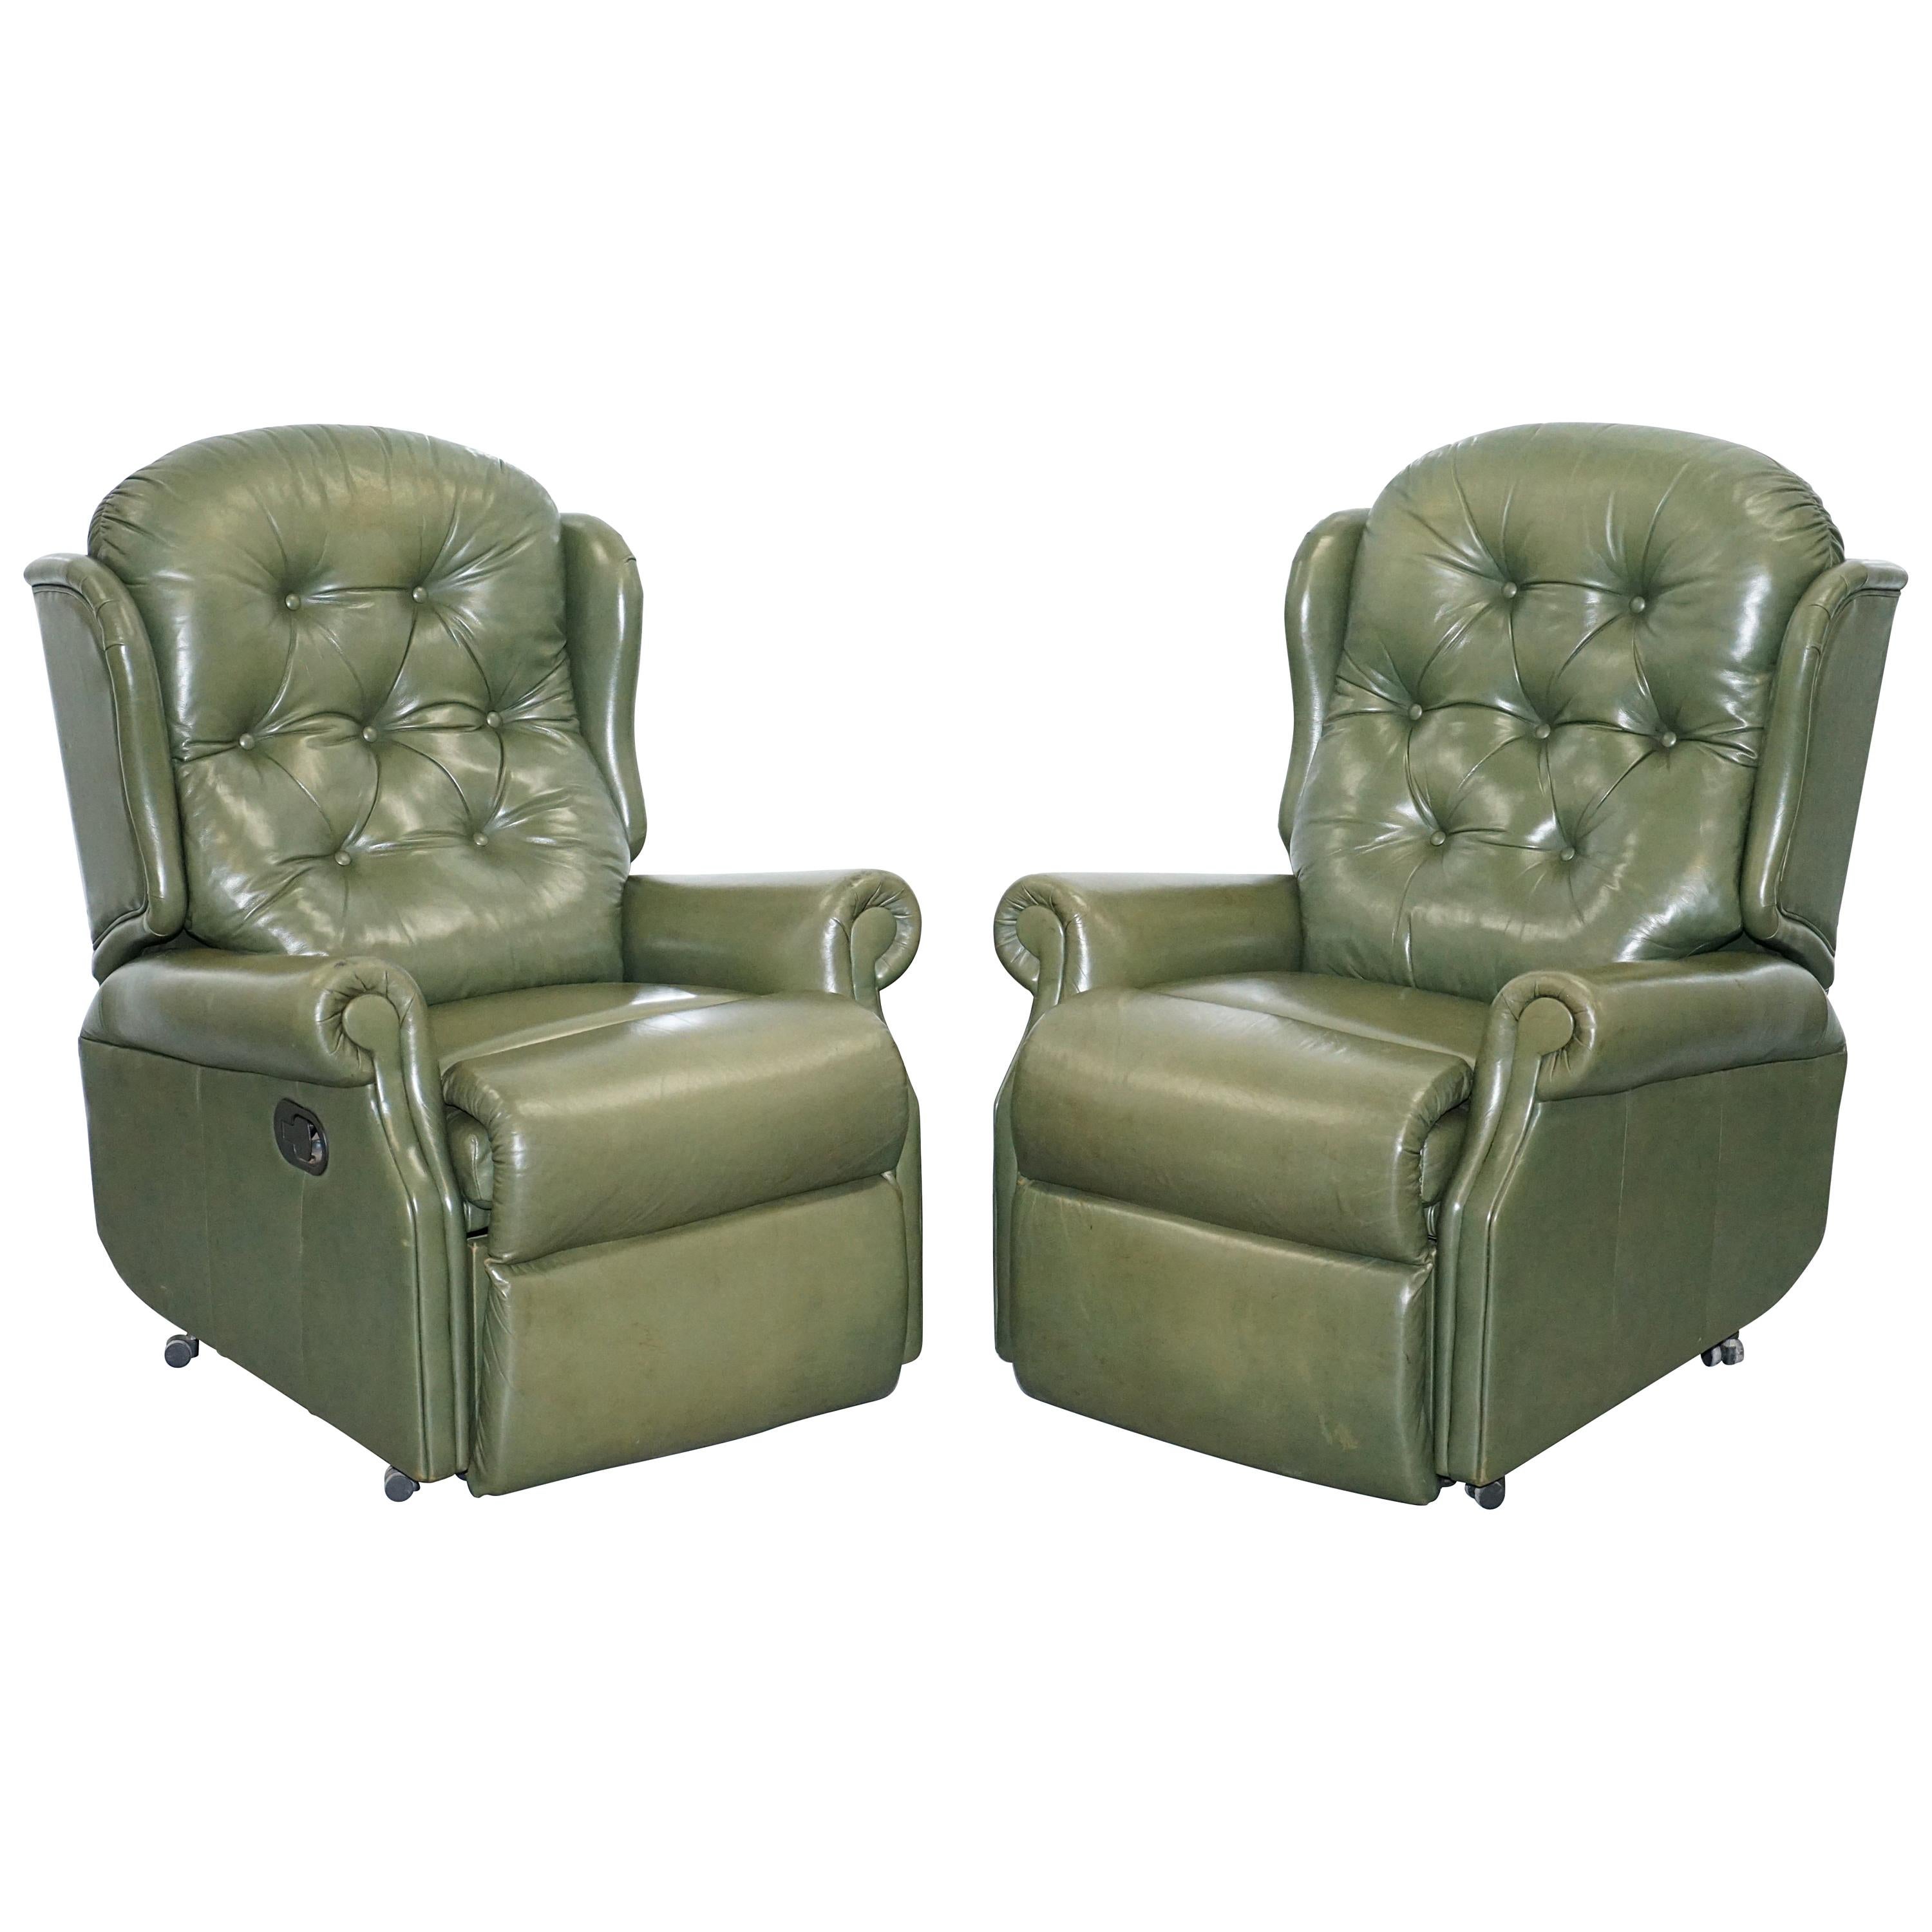 Pair of Sherborne Lynton Upholstery Green Leather Recliner Armchairs